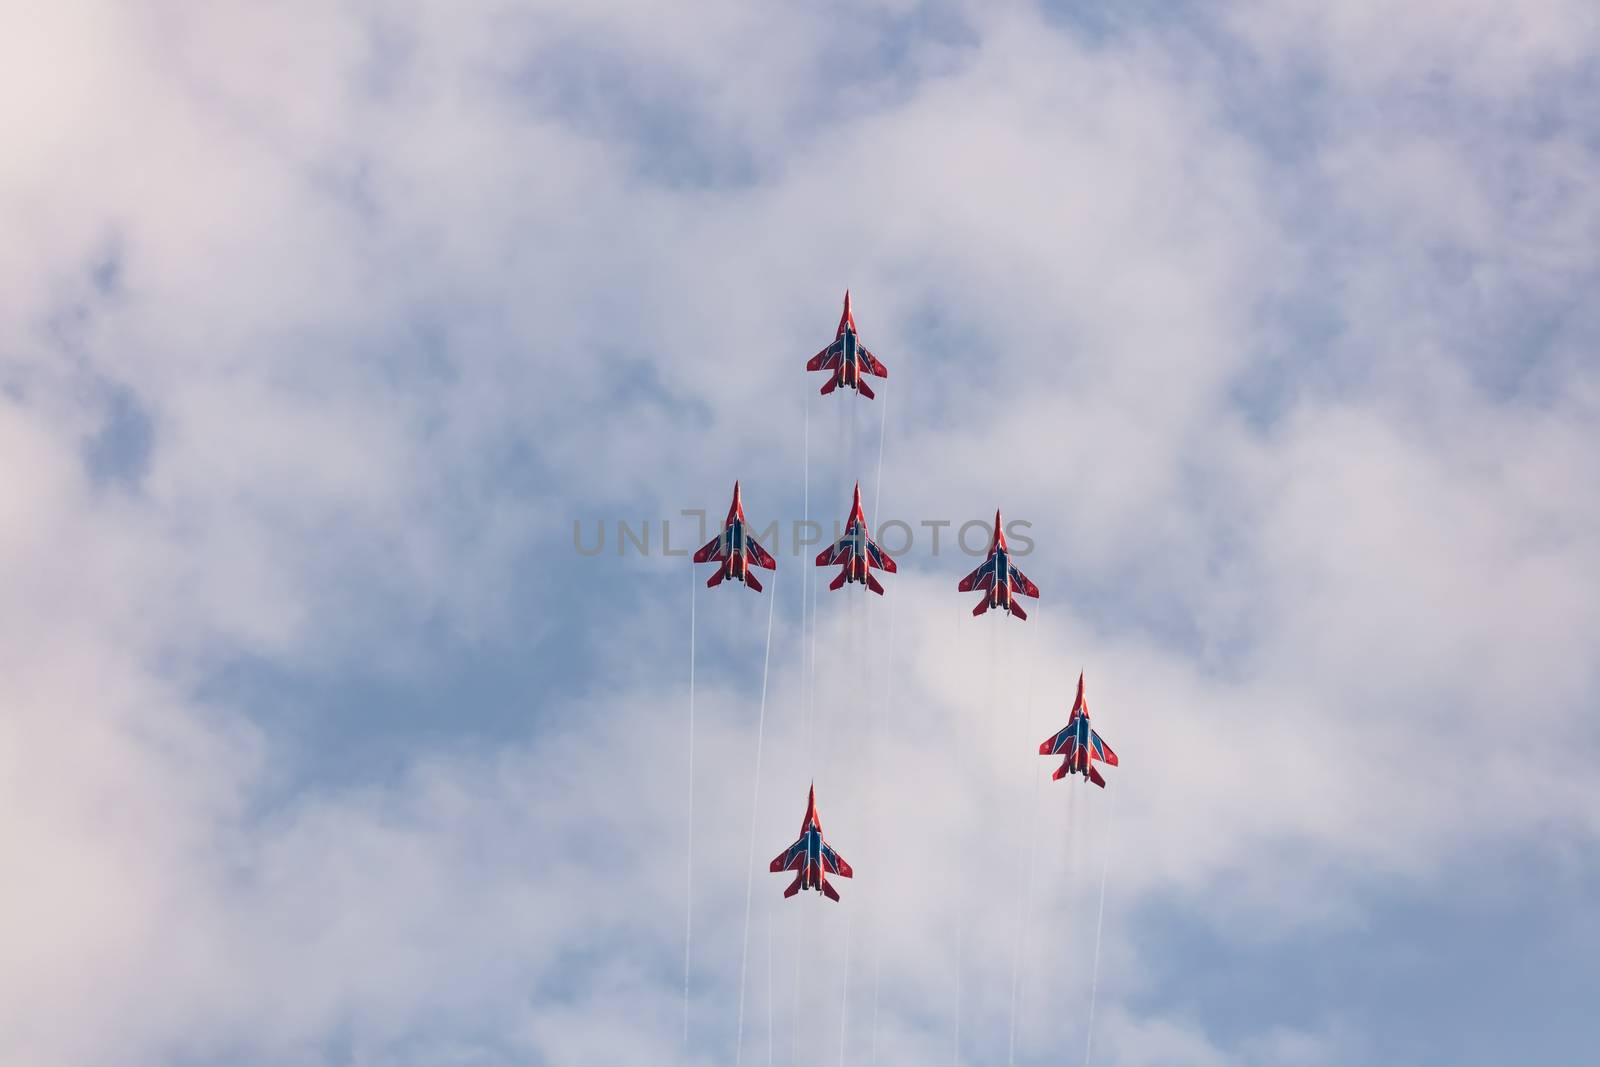 Barnaul, Russia - September 19, 2020: A low angle shot of Strizhi MiG-29 fighter jet squadron performing vertical ascending during an aeroshow. Blue cloudy sky as a background.